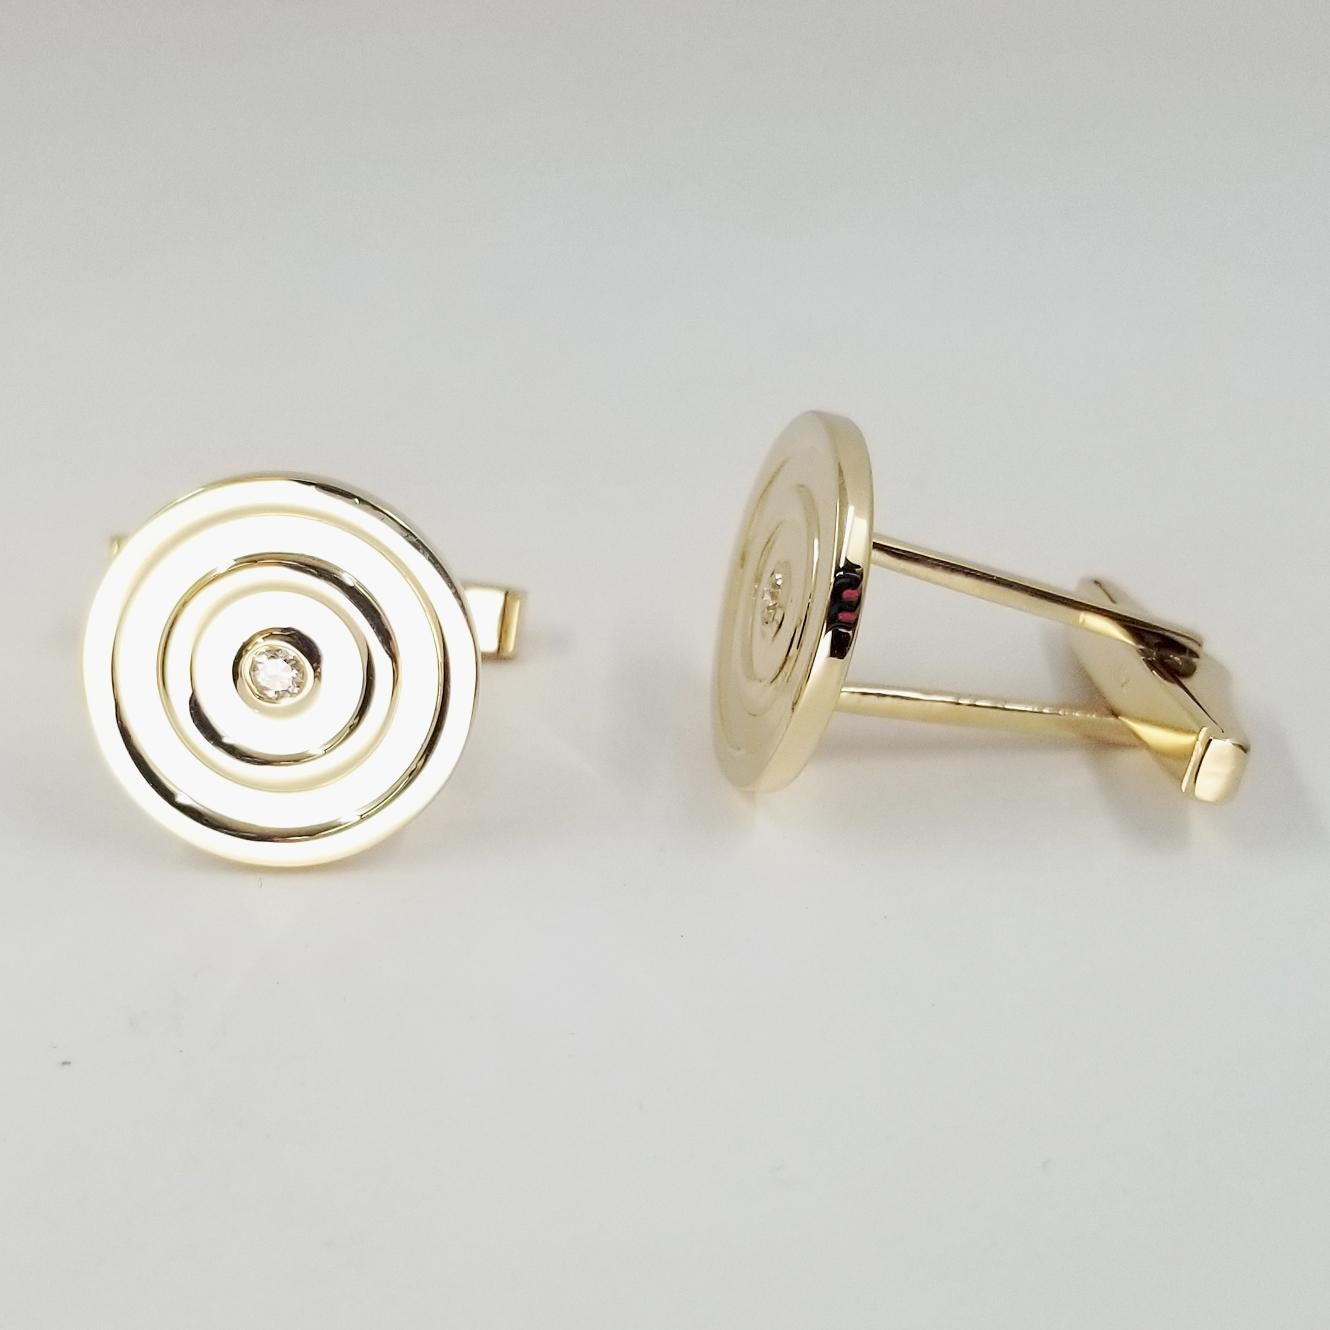 14 Karat Yellow Gold Ringed Cufflinks Featuring 2 Round Bezel Set Diamonds Totaling Approx 0.10 Carat. Finished Weight is 11.8 grams. Torpedo Backs.